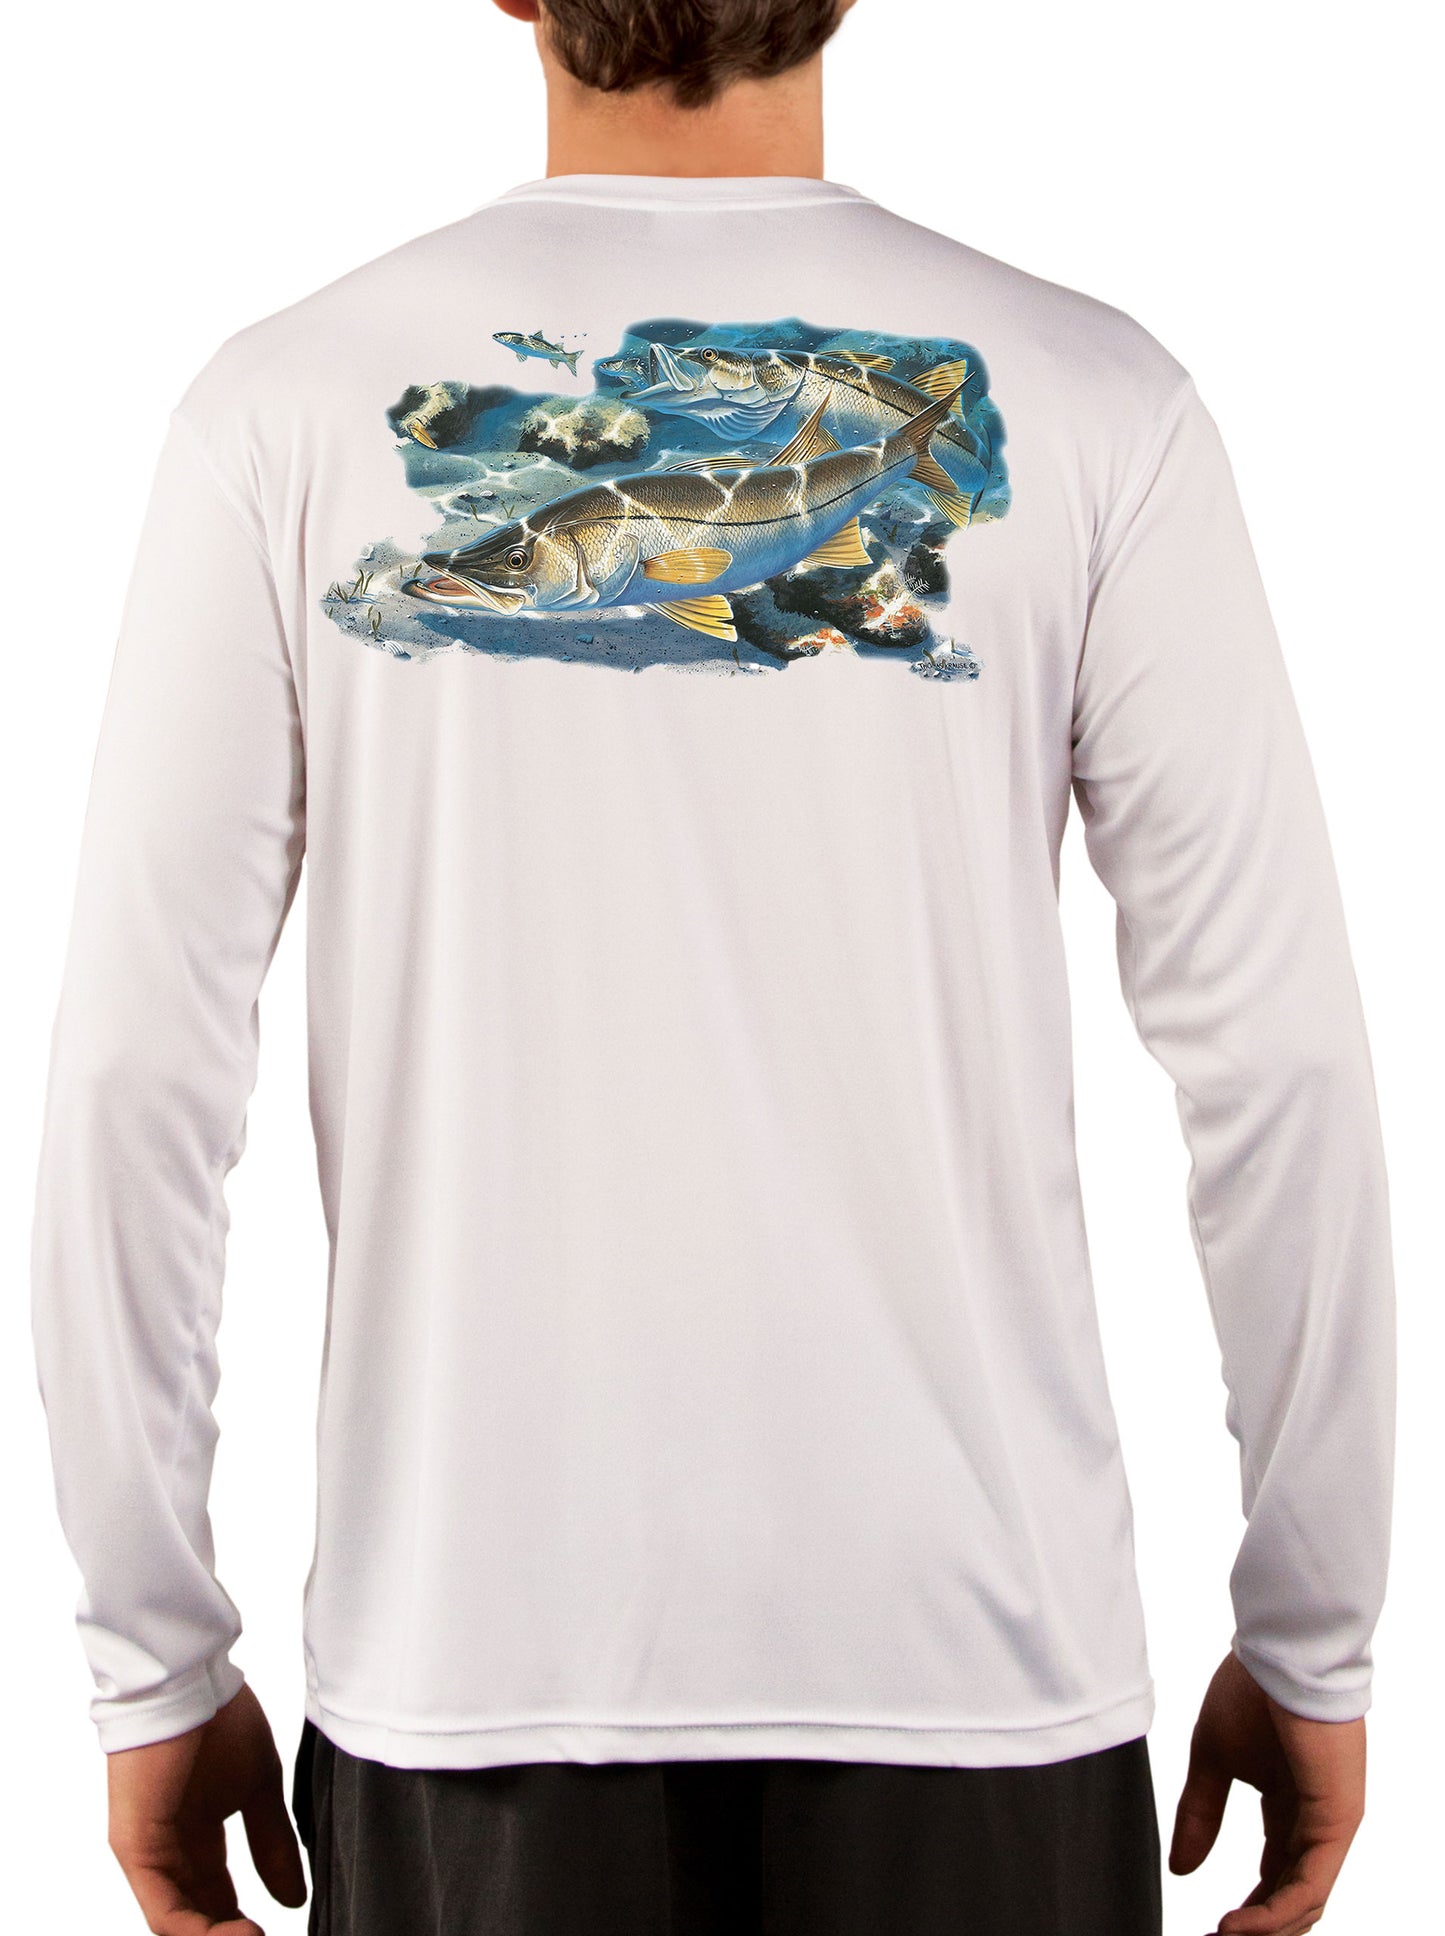 Fishing Shirt Snook Design Along the Jetty by Thomas Krause - Skiff Life